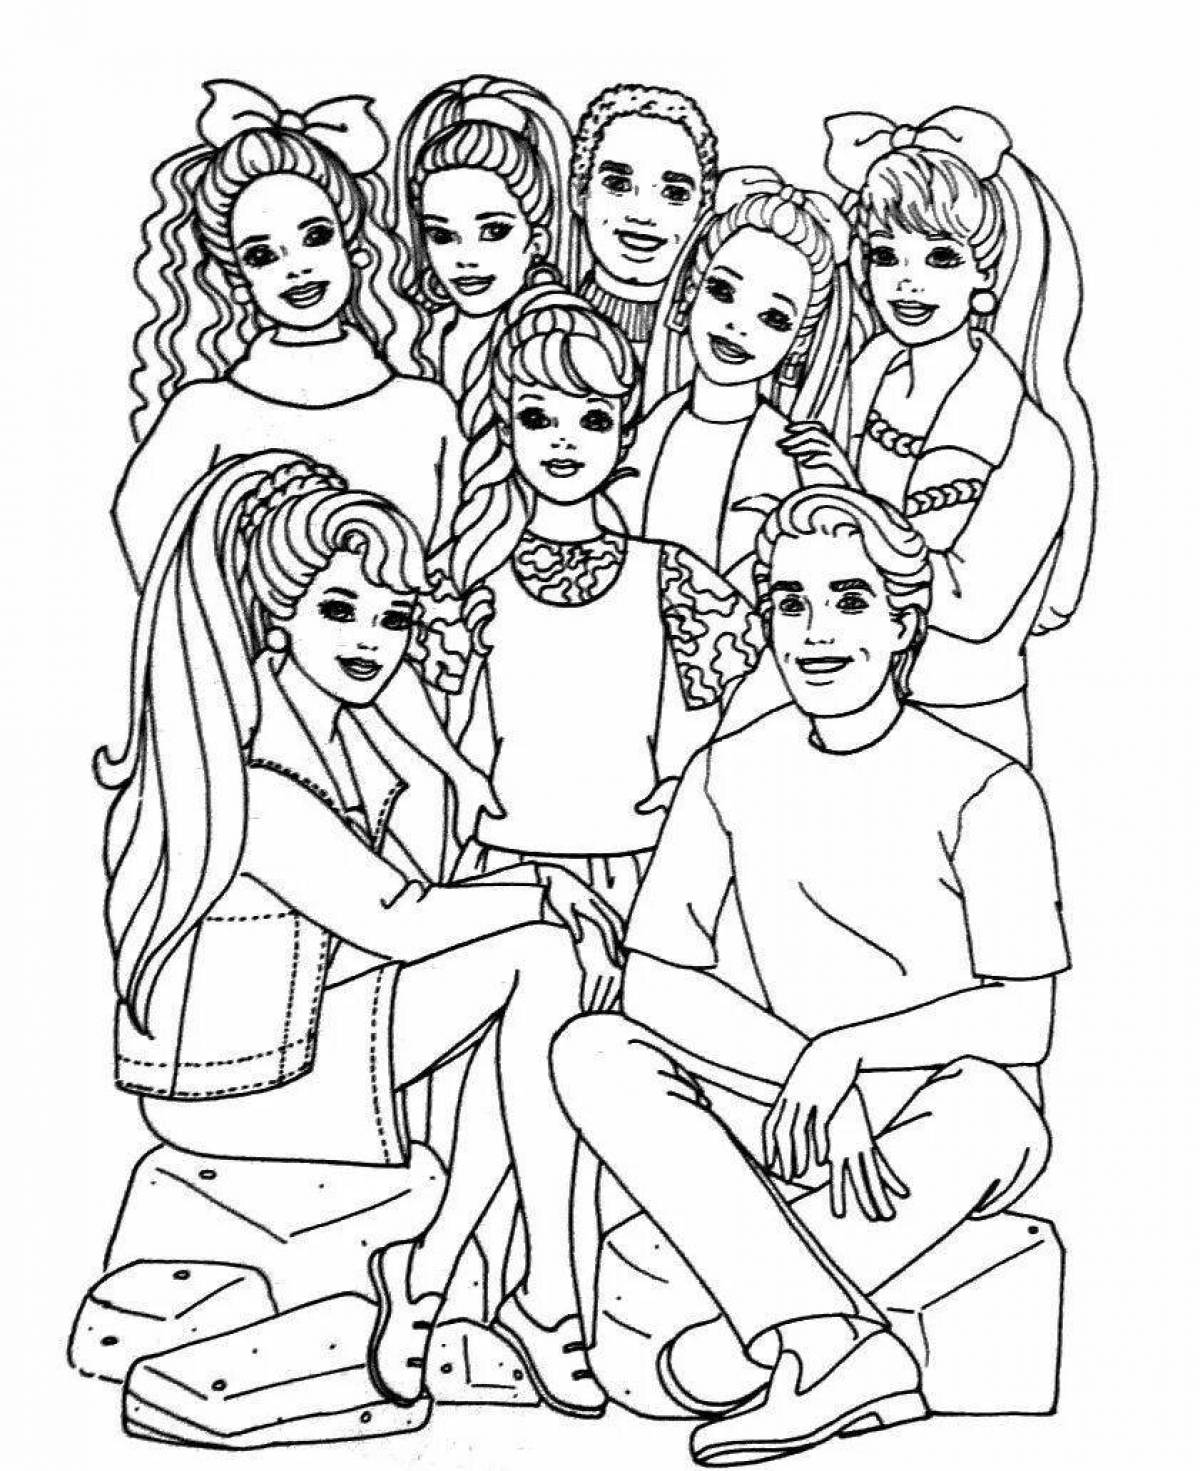 Sweet father's daughter coloring page